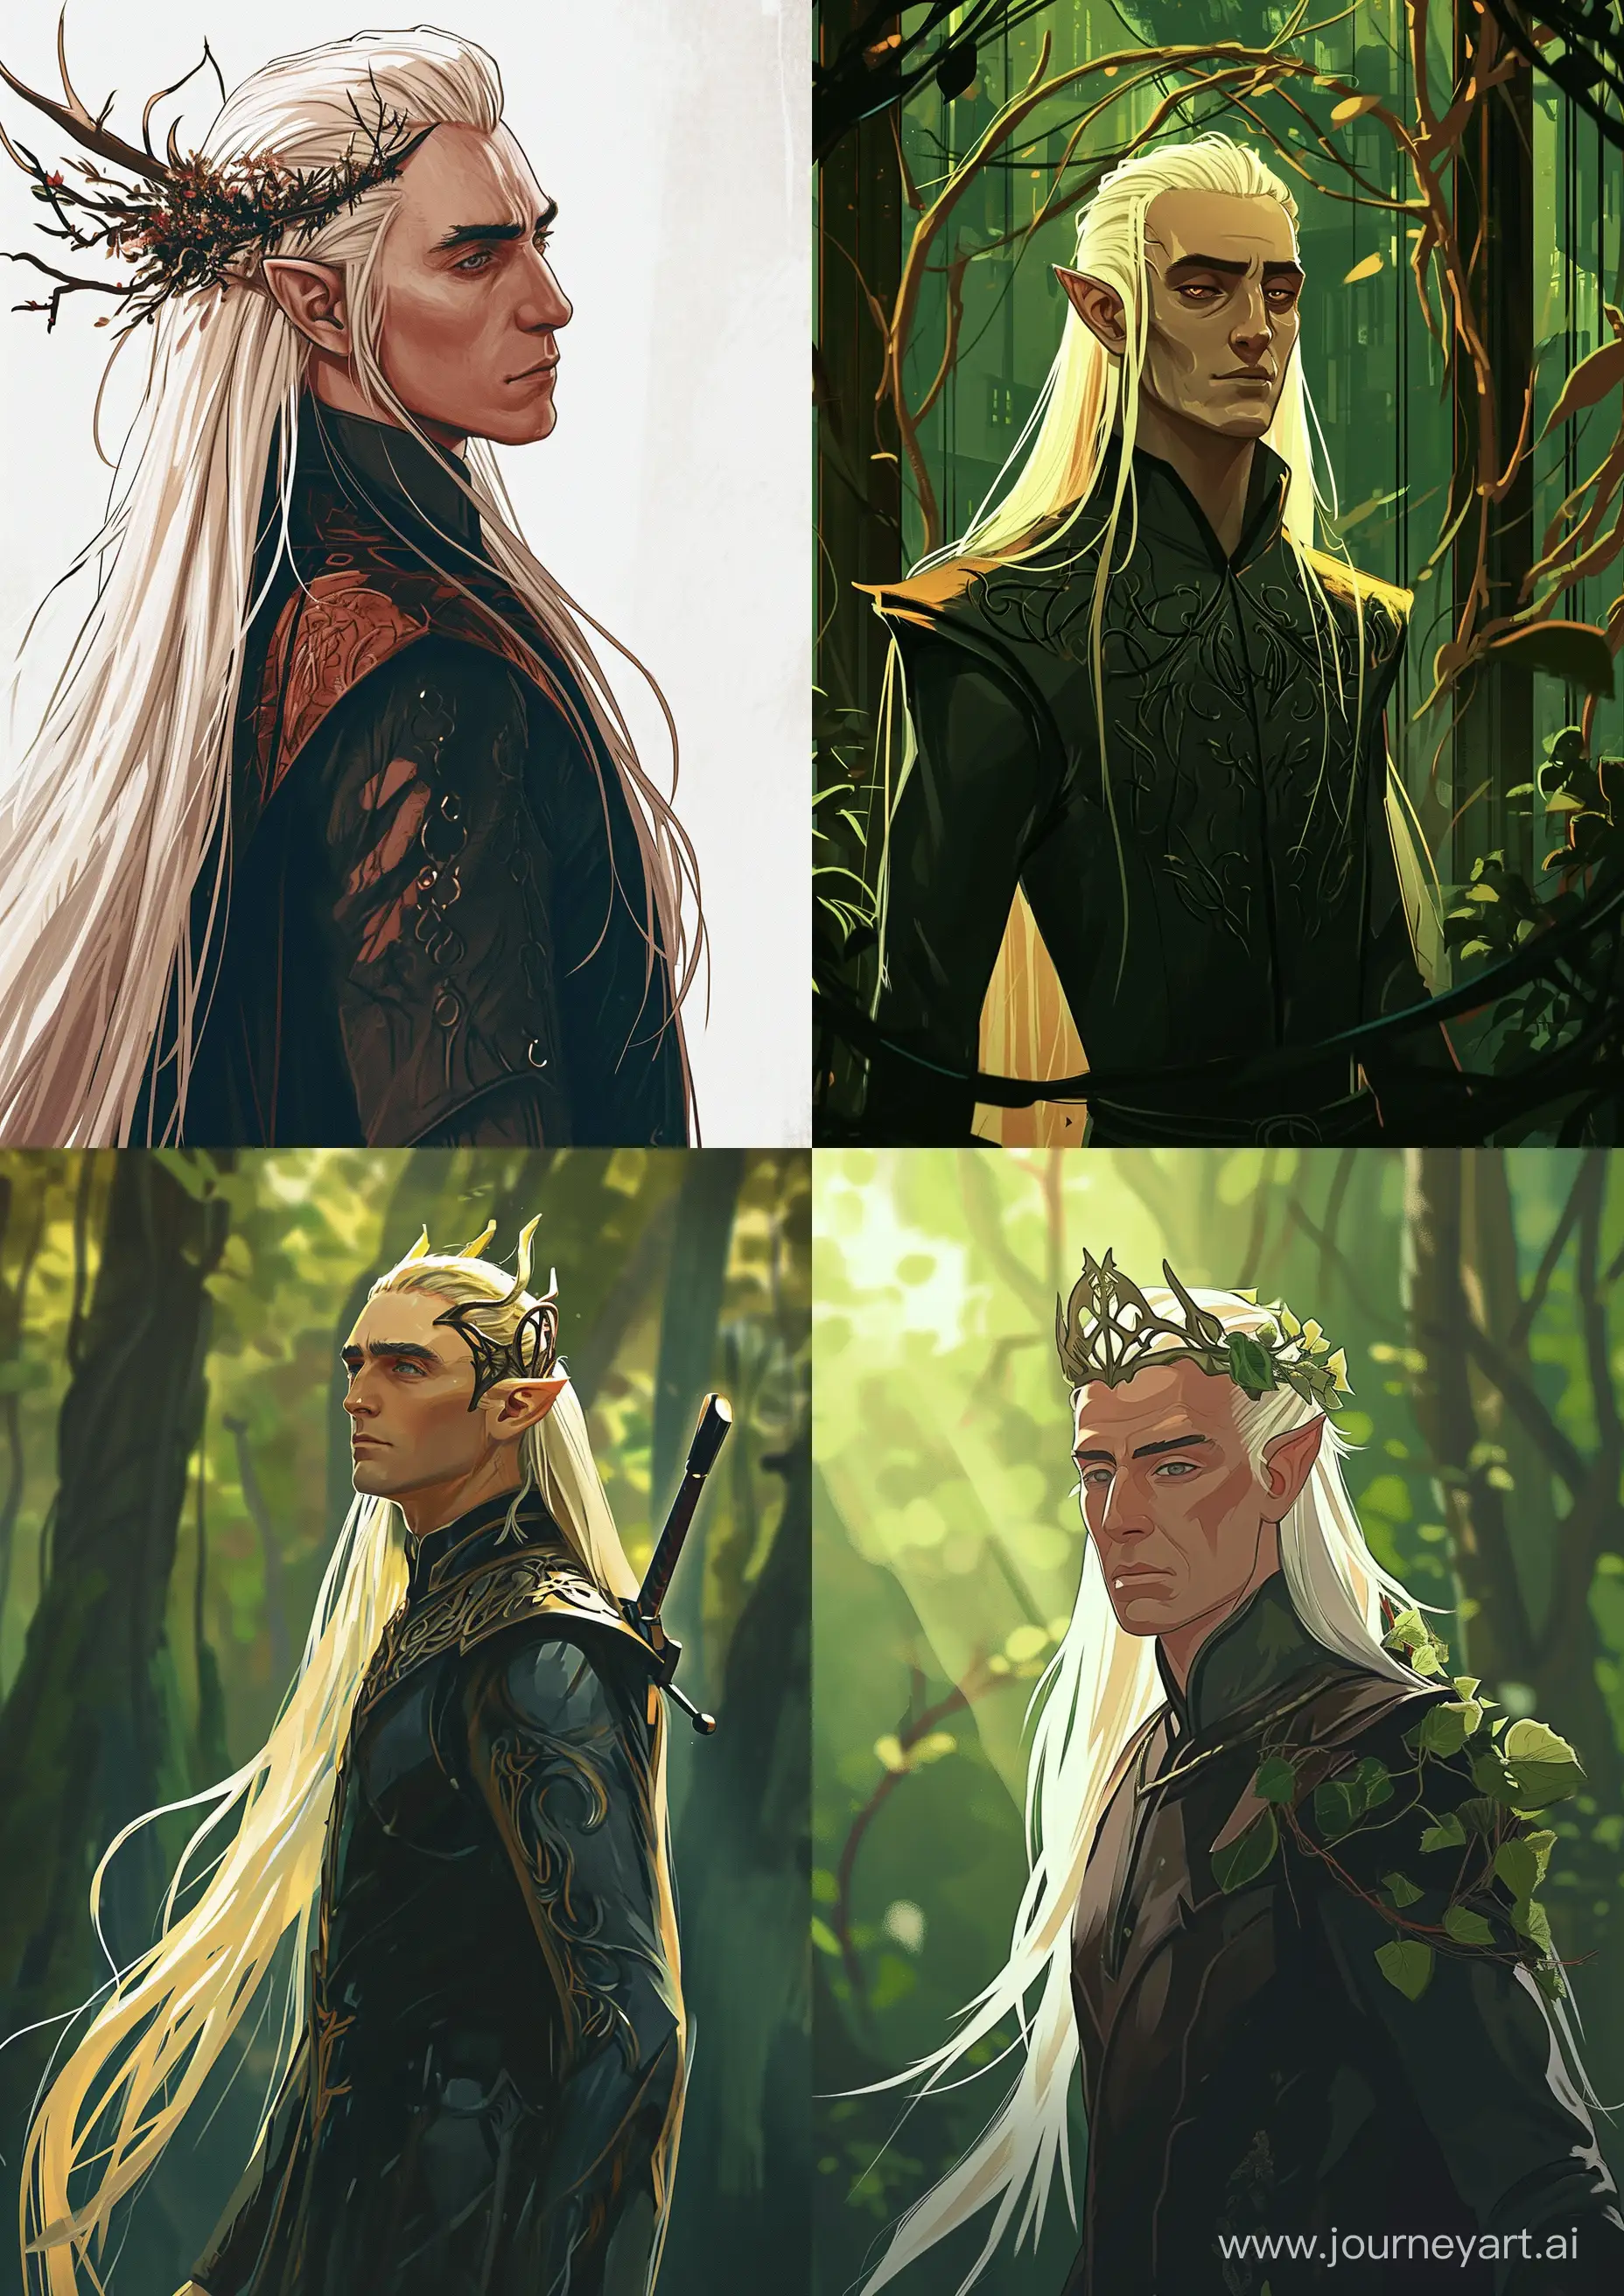 Thranduil-Lord-of-the-Rings-in-Rick-and-Morty-Style-Art